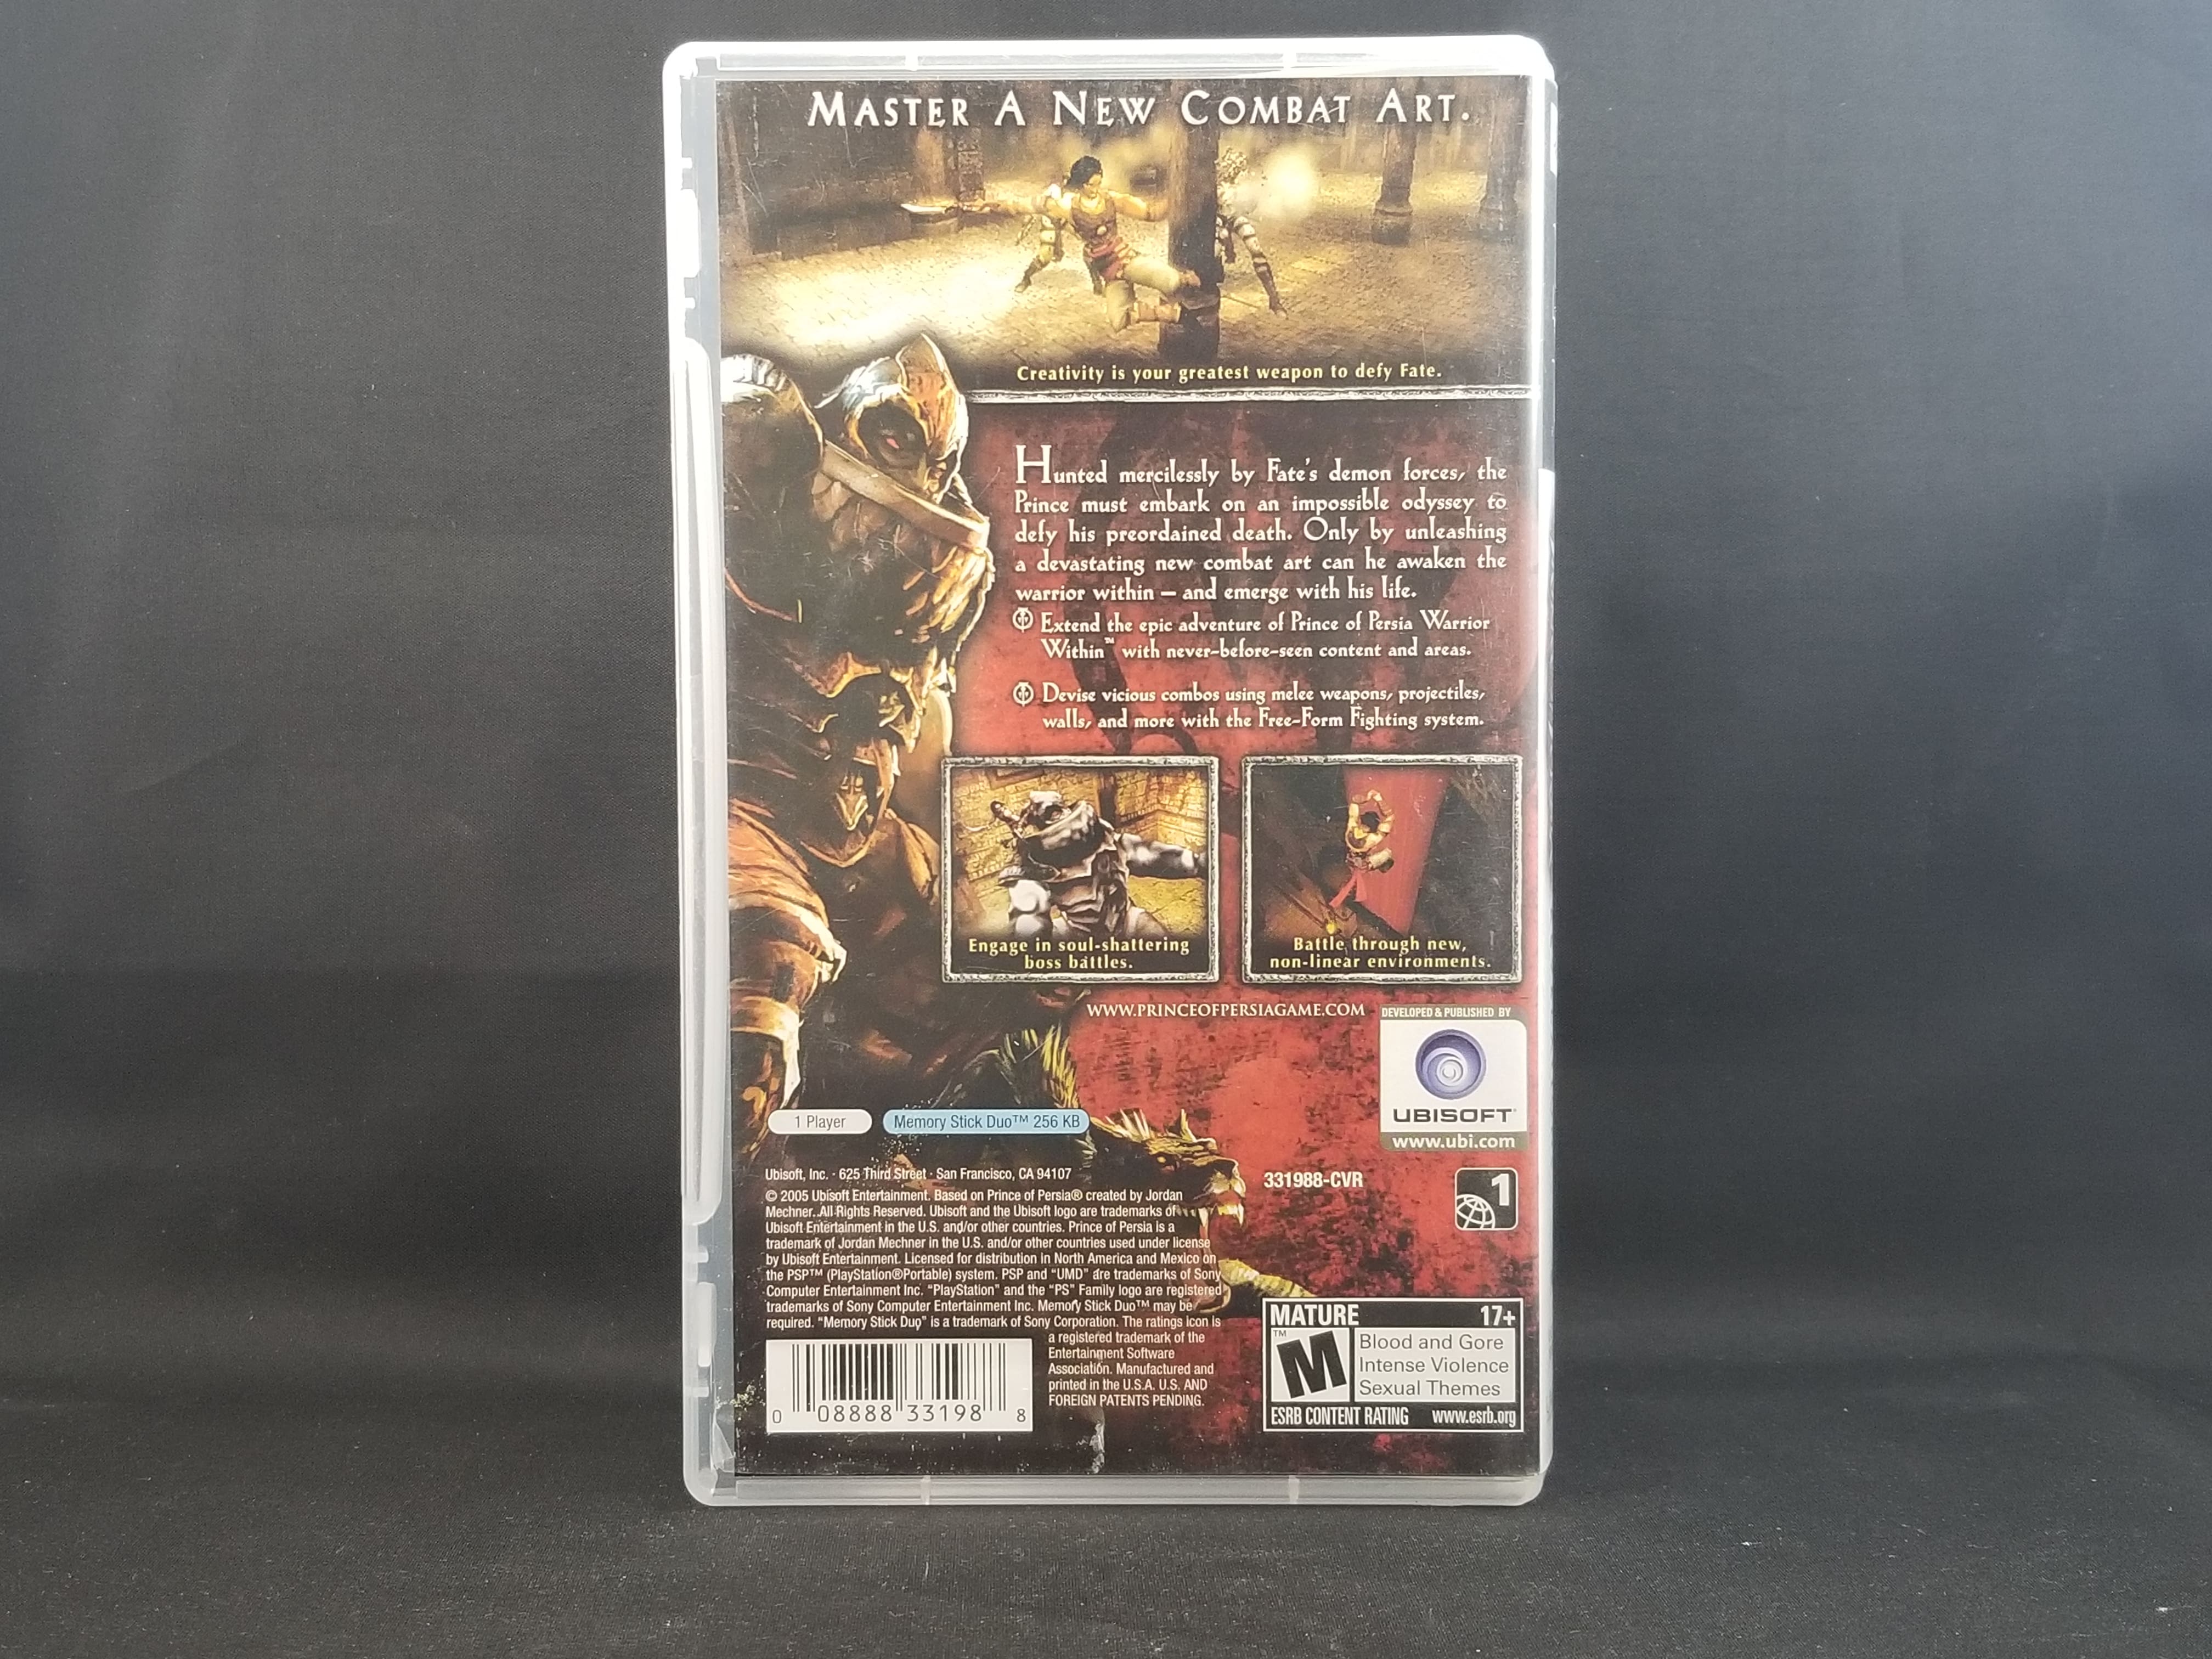 Prince of Persia Revelations - PSP